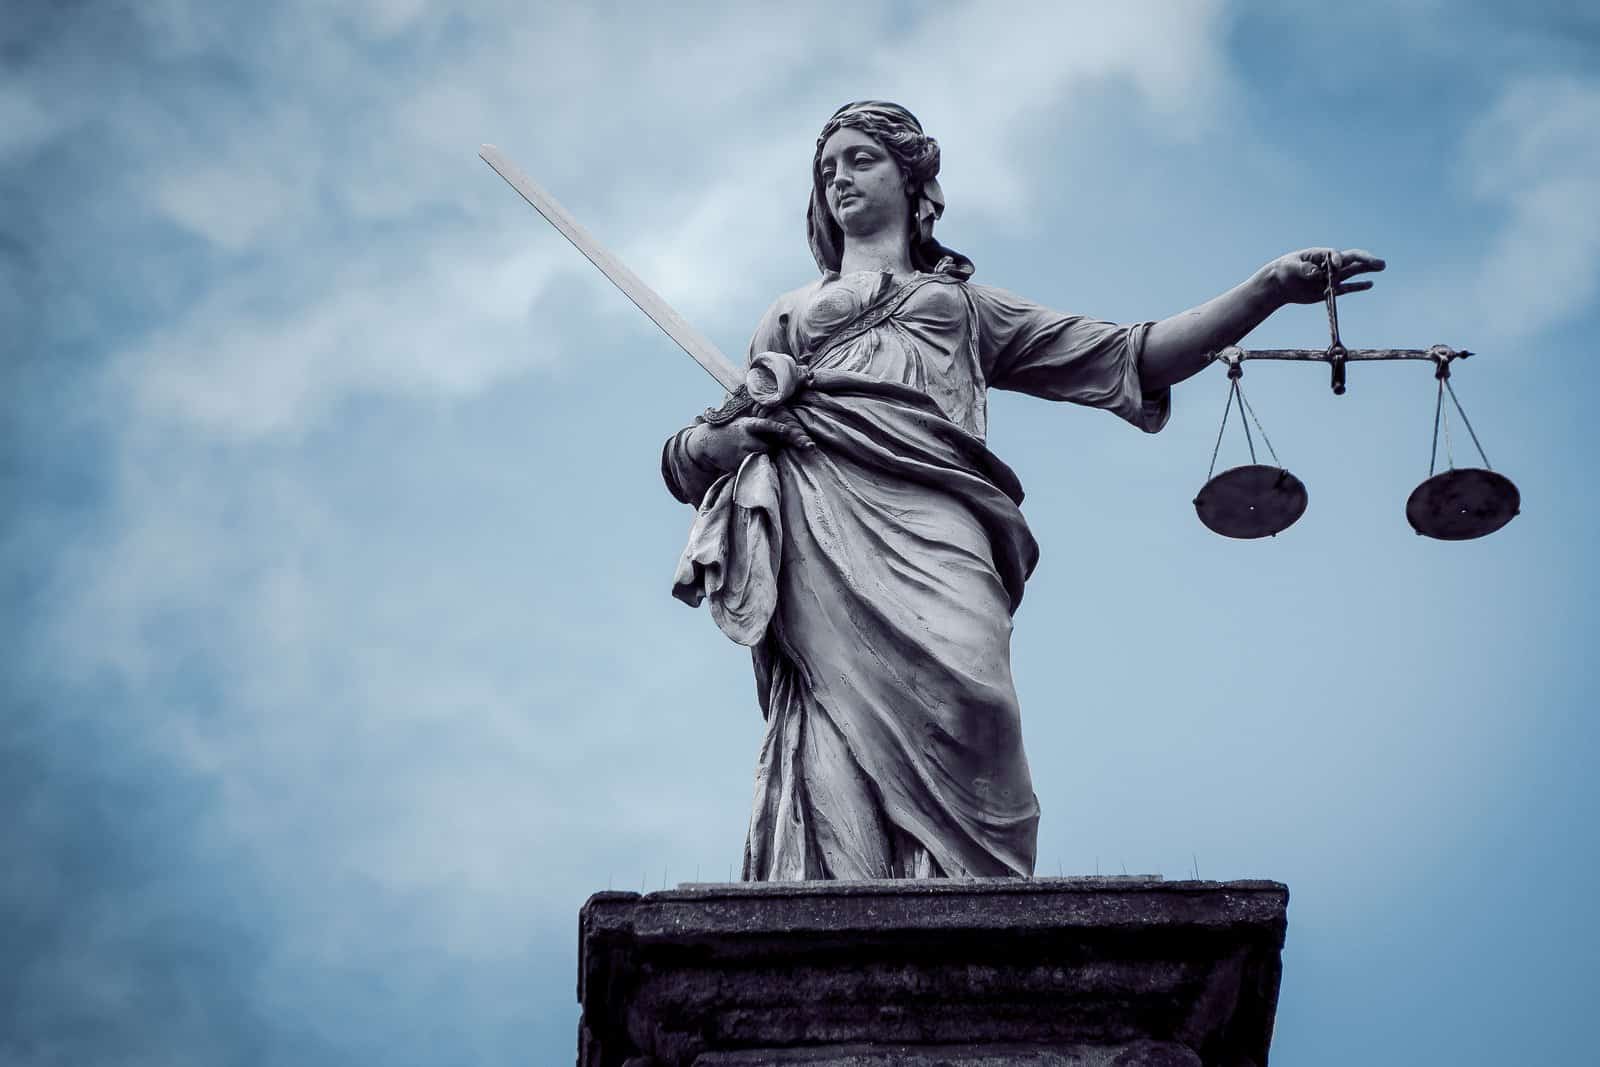 Lady Justice Cover by DJO Photo at Flickr